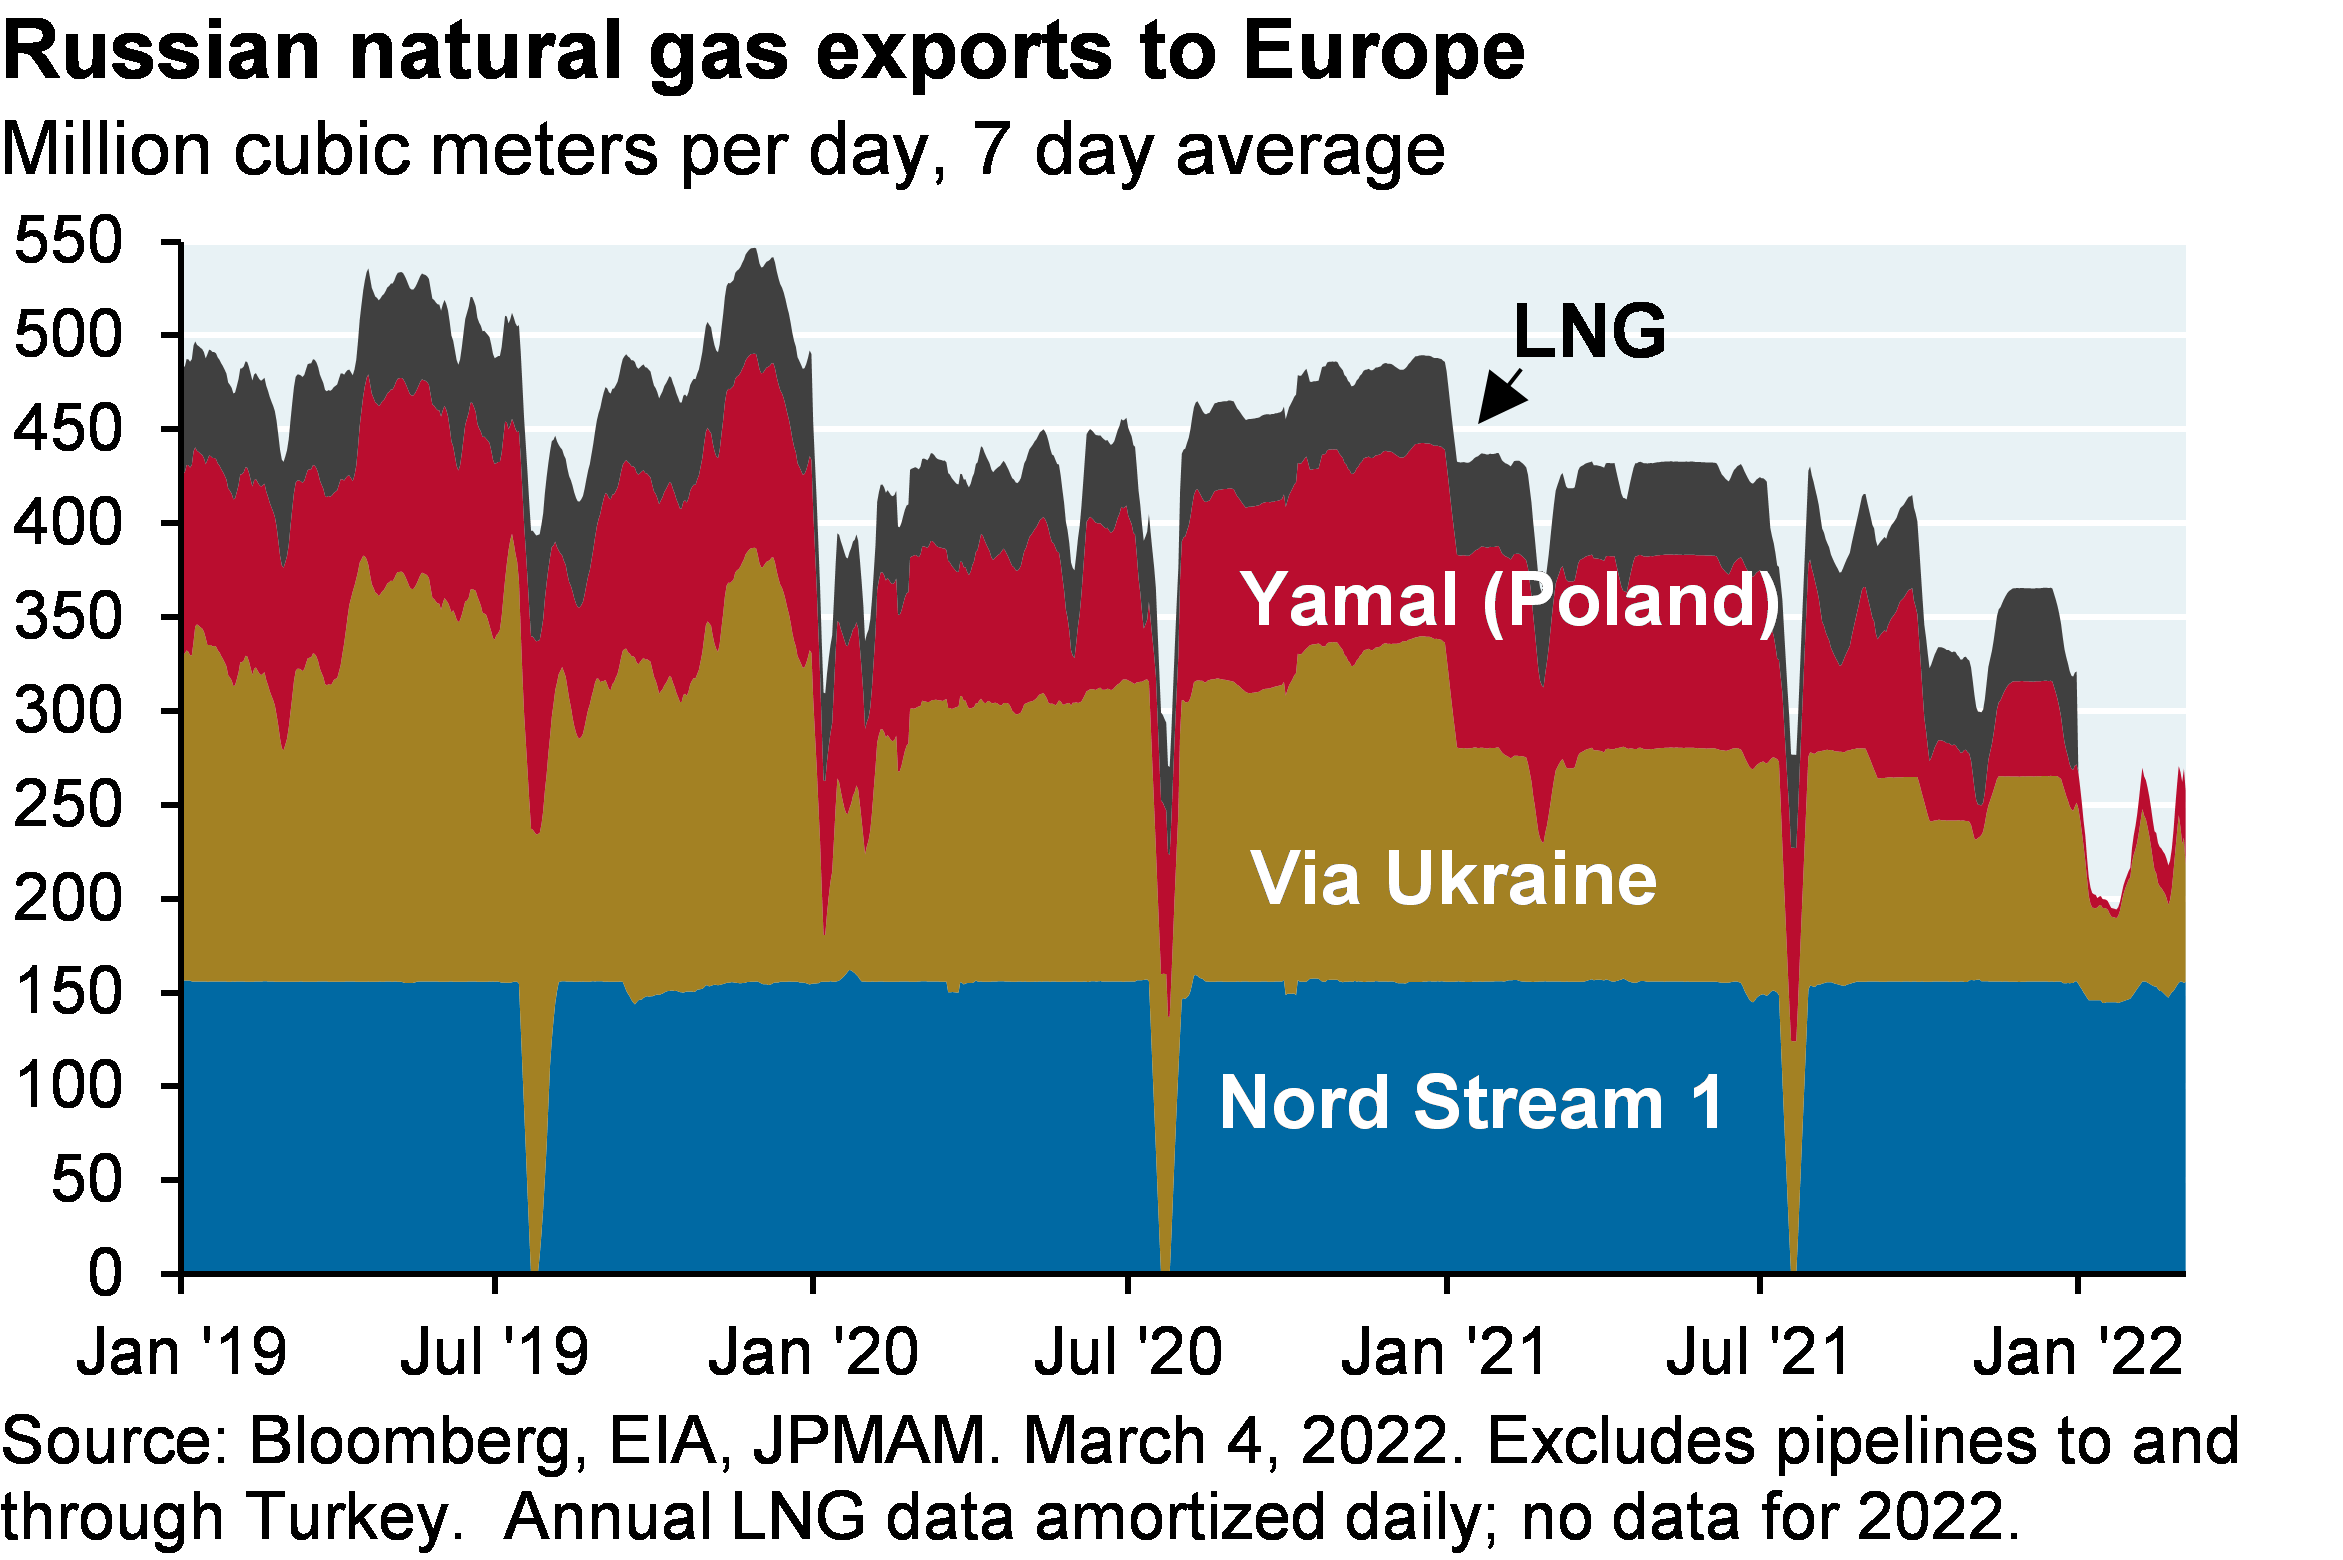 Area chart which shows Russian natural gas exports to Europe since January 2019. The chart breaks out Russian exports to Europe by Nord Stream 1 exports, exports via Ukraine, Yamal exports and LNG exports. 